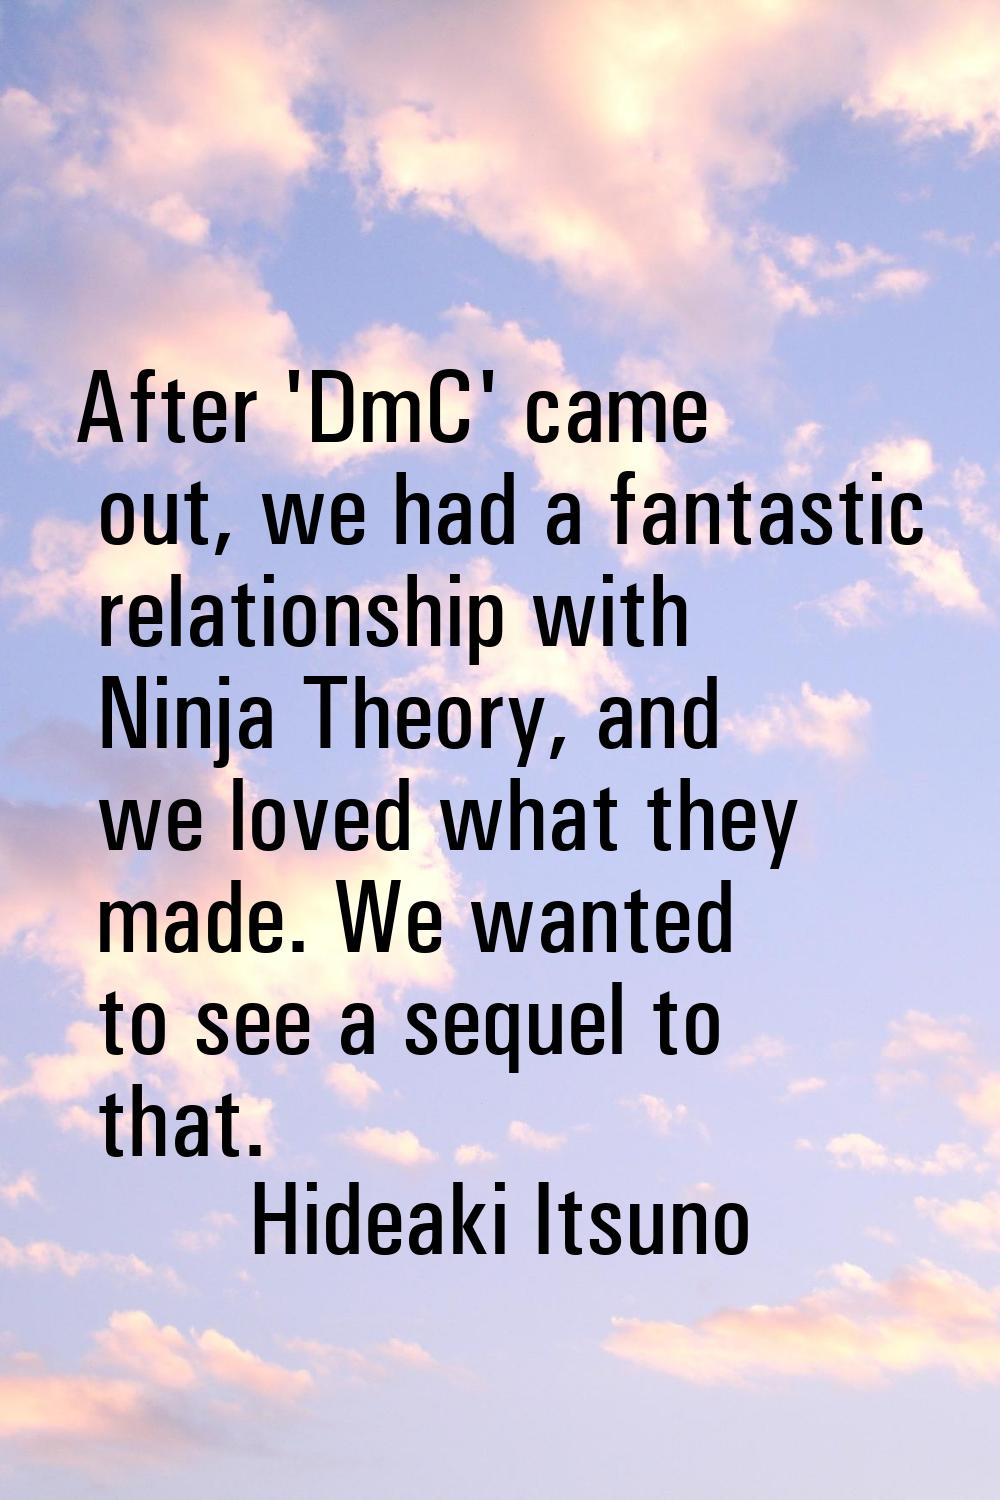 After 'DmC' came out, we had a fantastic relationship with Ninja Theory, and we loved what they mad